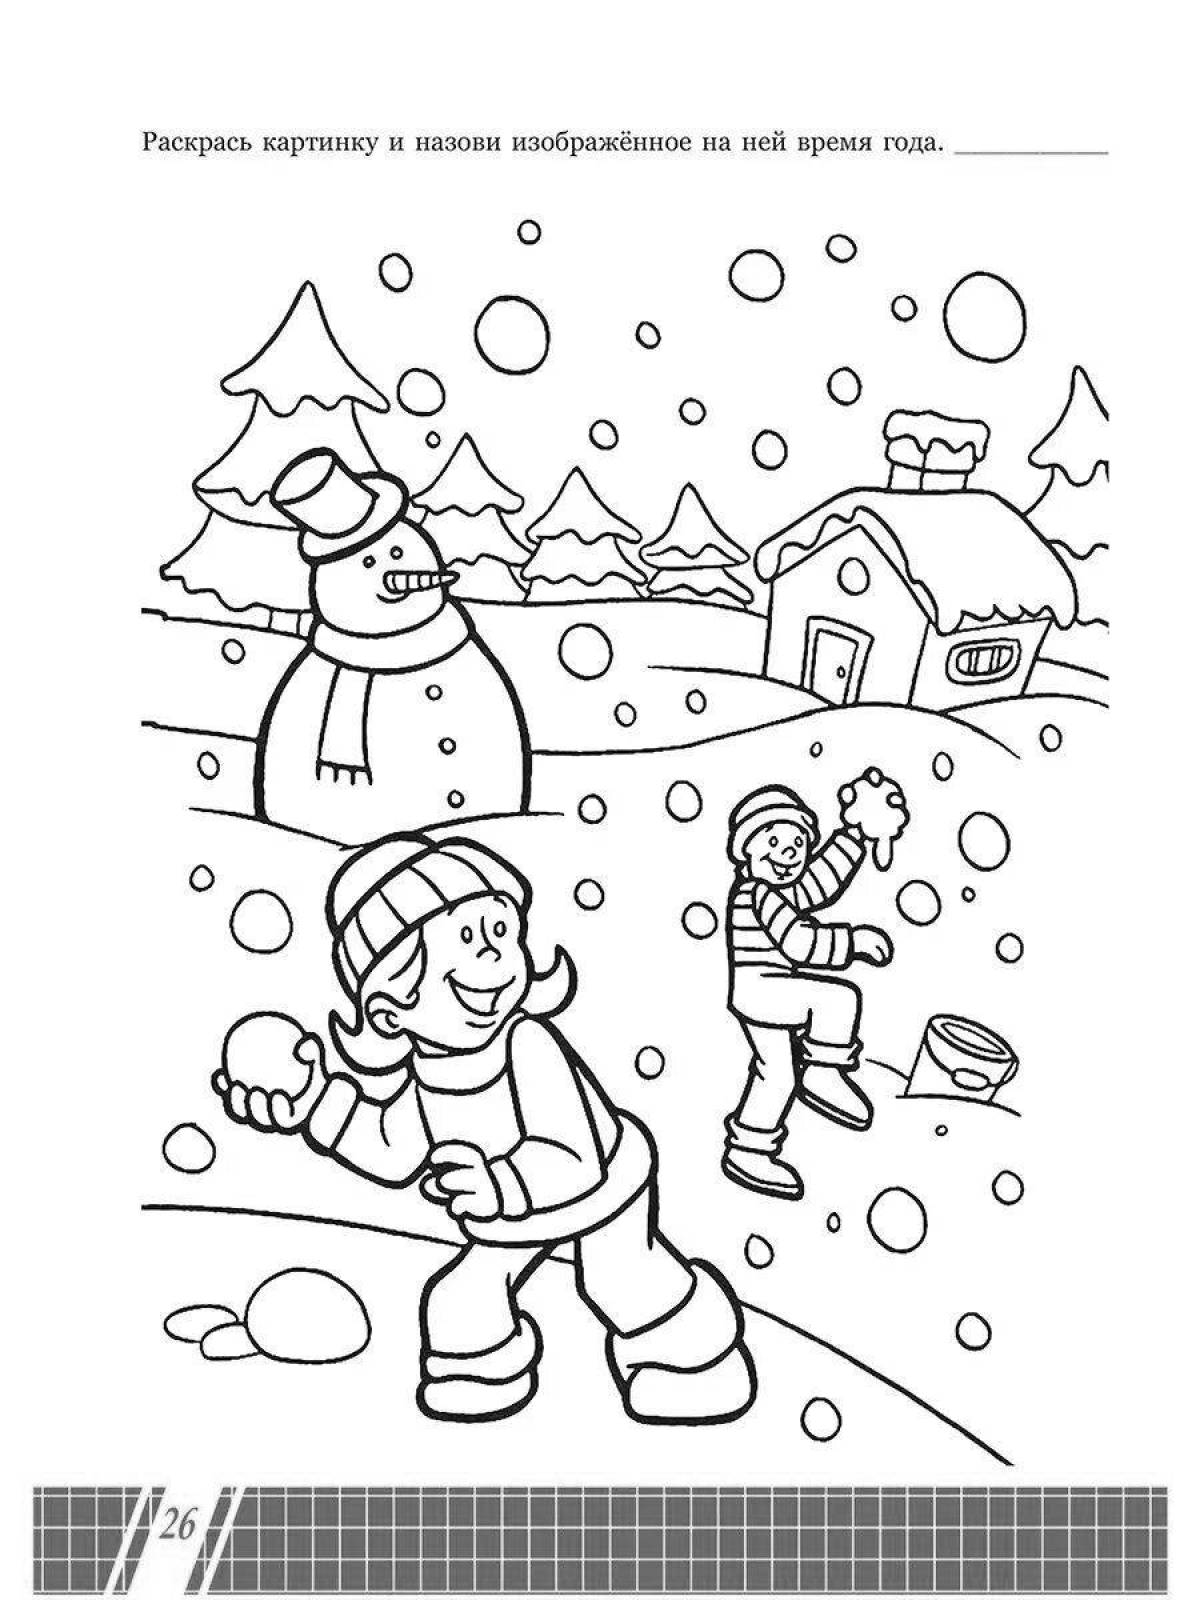 Magic winter coloring book for children 3-4 years old